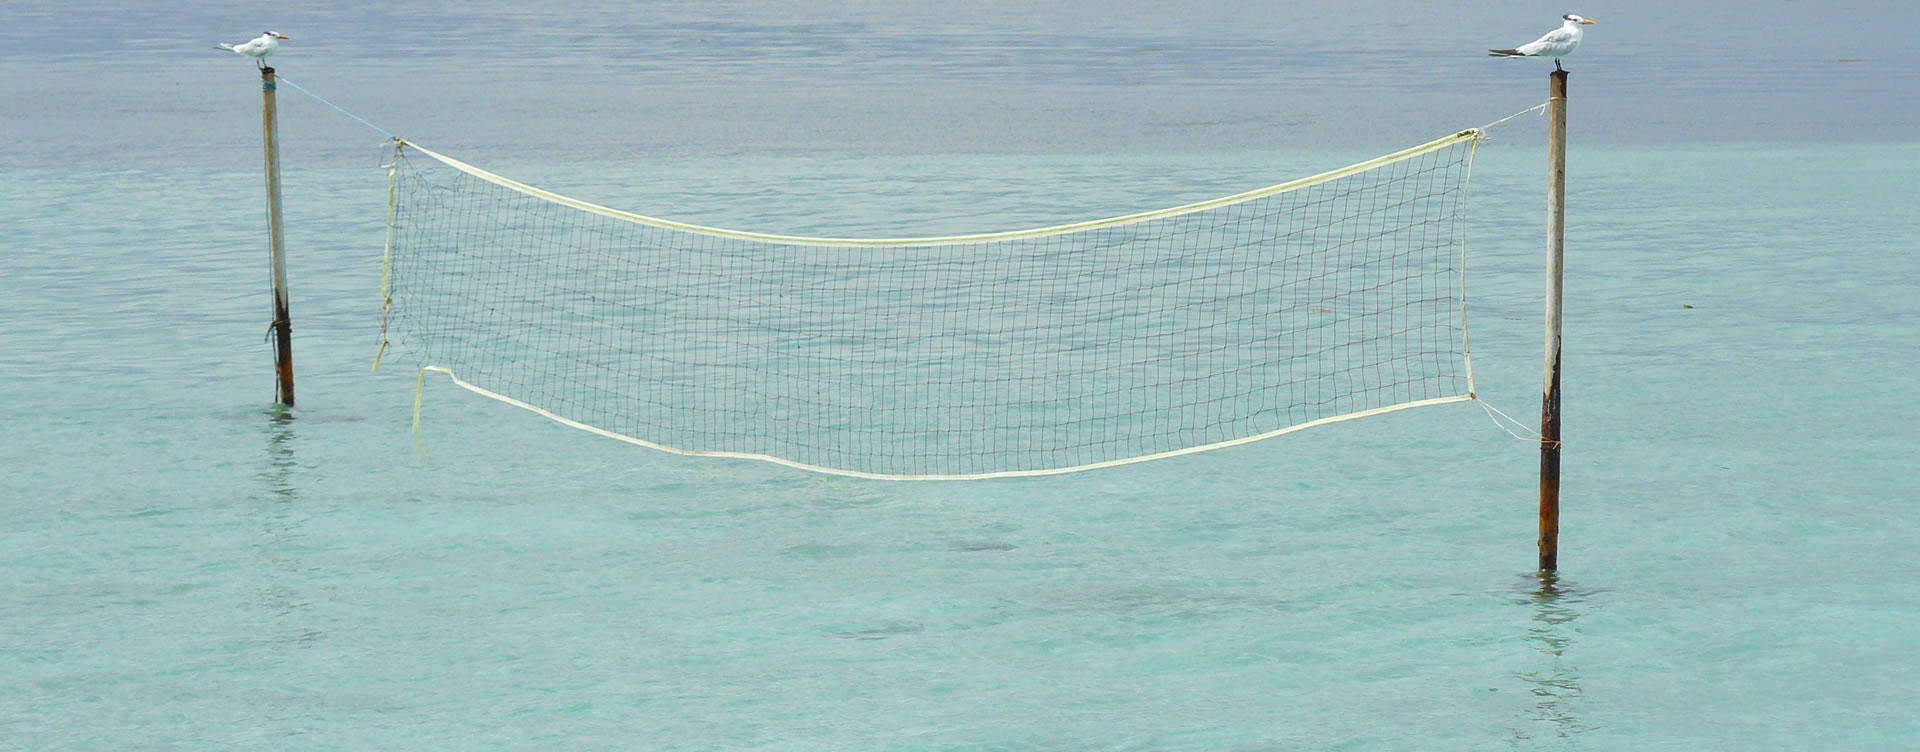 volleyball in the ocean